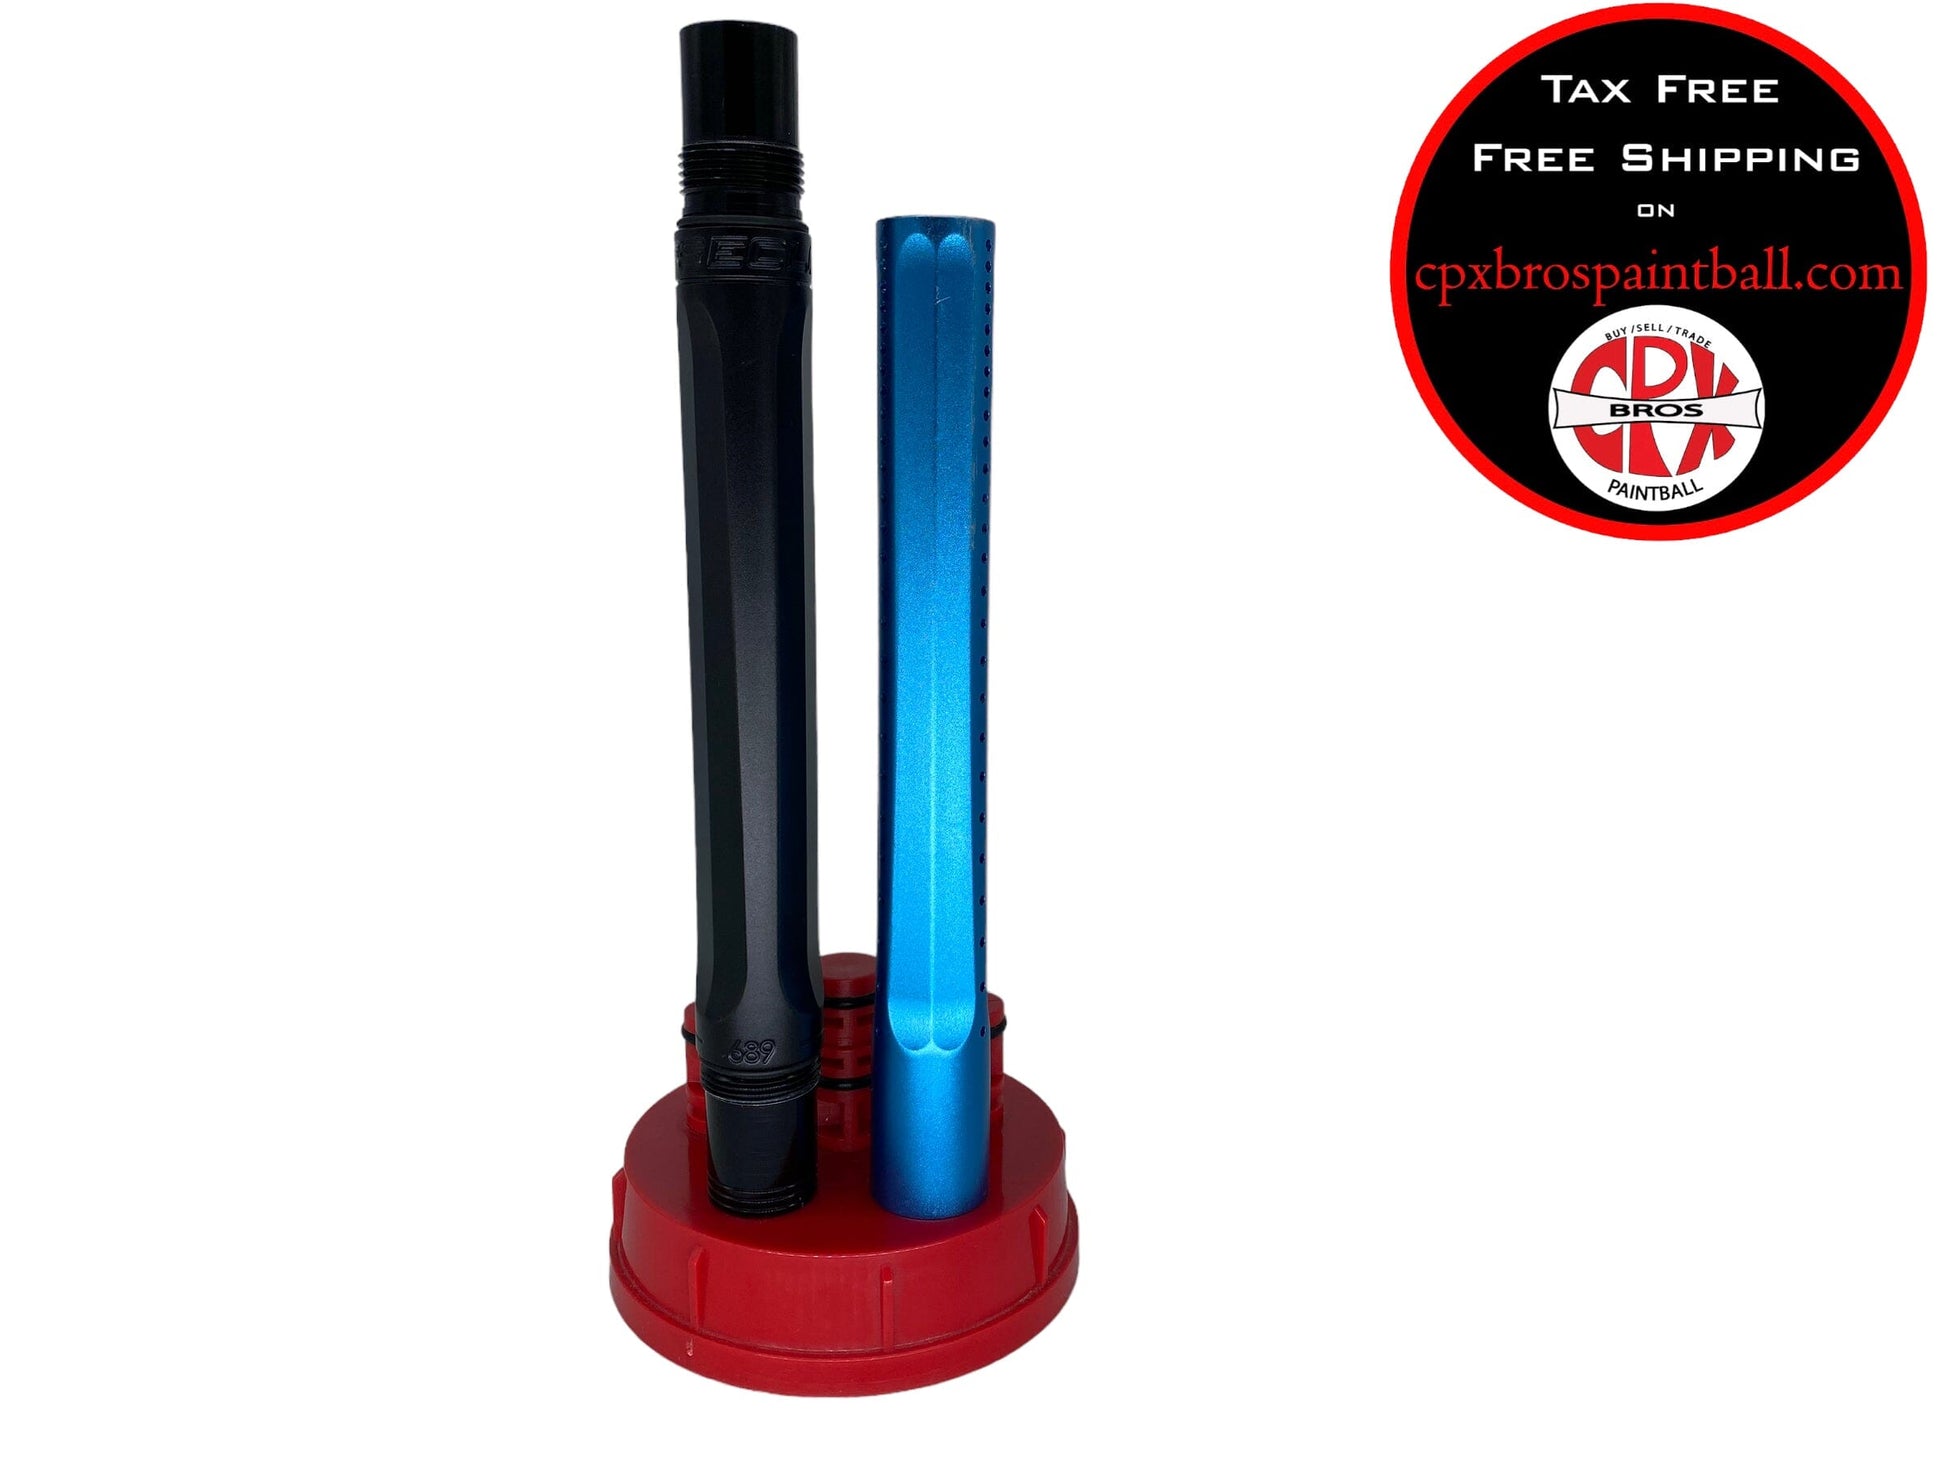 Used Planet Eclipse Shaft 5 Barrel .689 Blue Black Paintball Gun from CPXBrosPaintball Buy/Sell/Trade Paintball Markers, Paintball Hoppers, Paintball Masks, and Hormesis Headbands